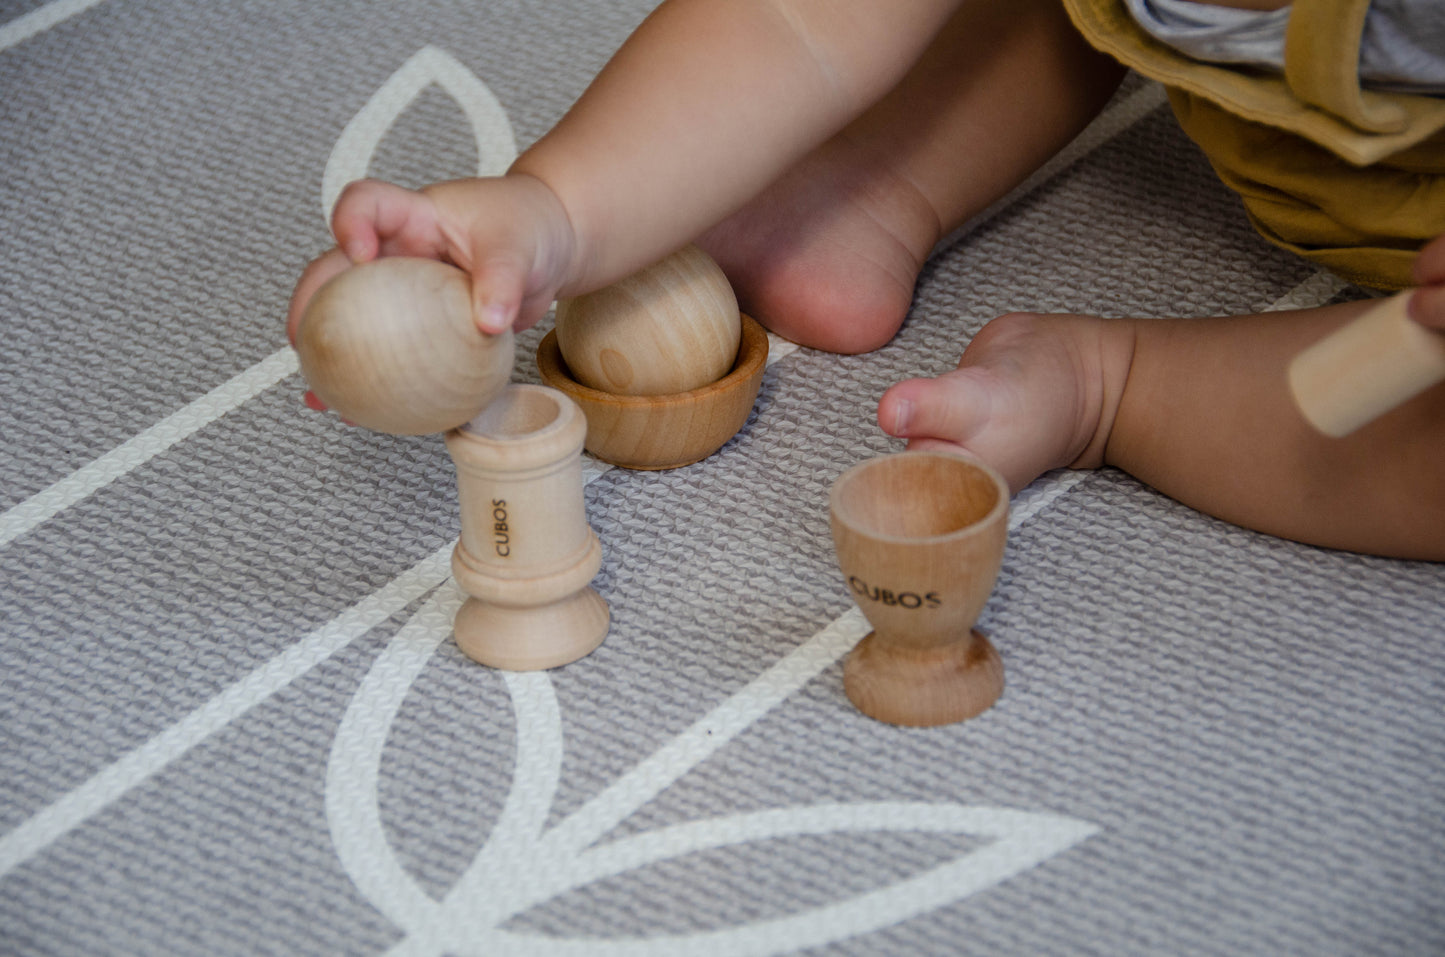 Baby joyfully playing with the Egg Cup from the Cubos Ball Bowl Peg & Egg Cup set, discovering the fun and surprises it offers during playtime.